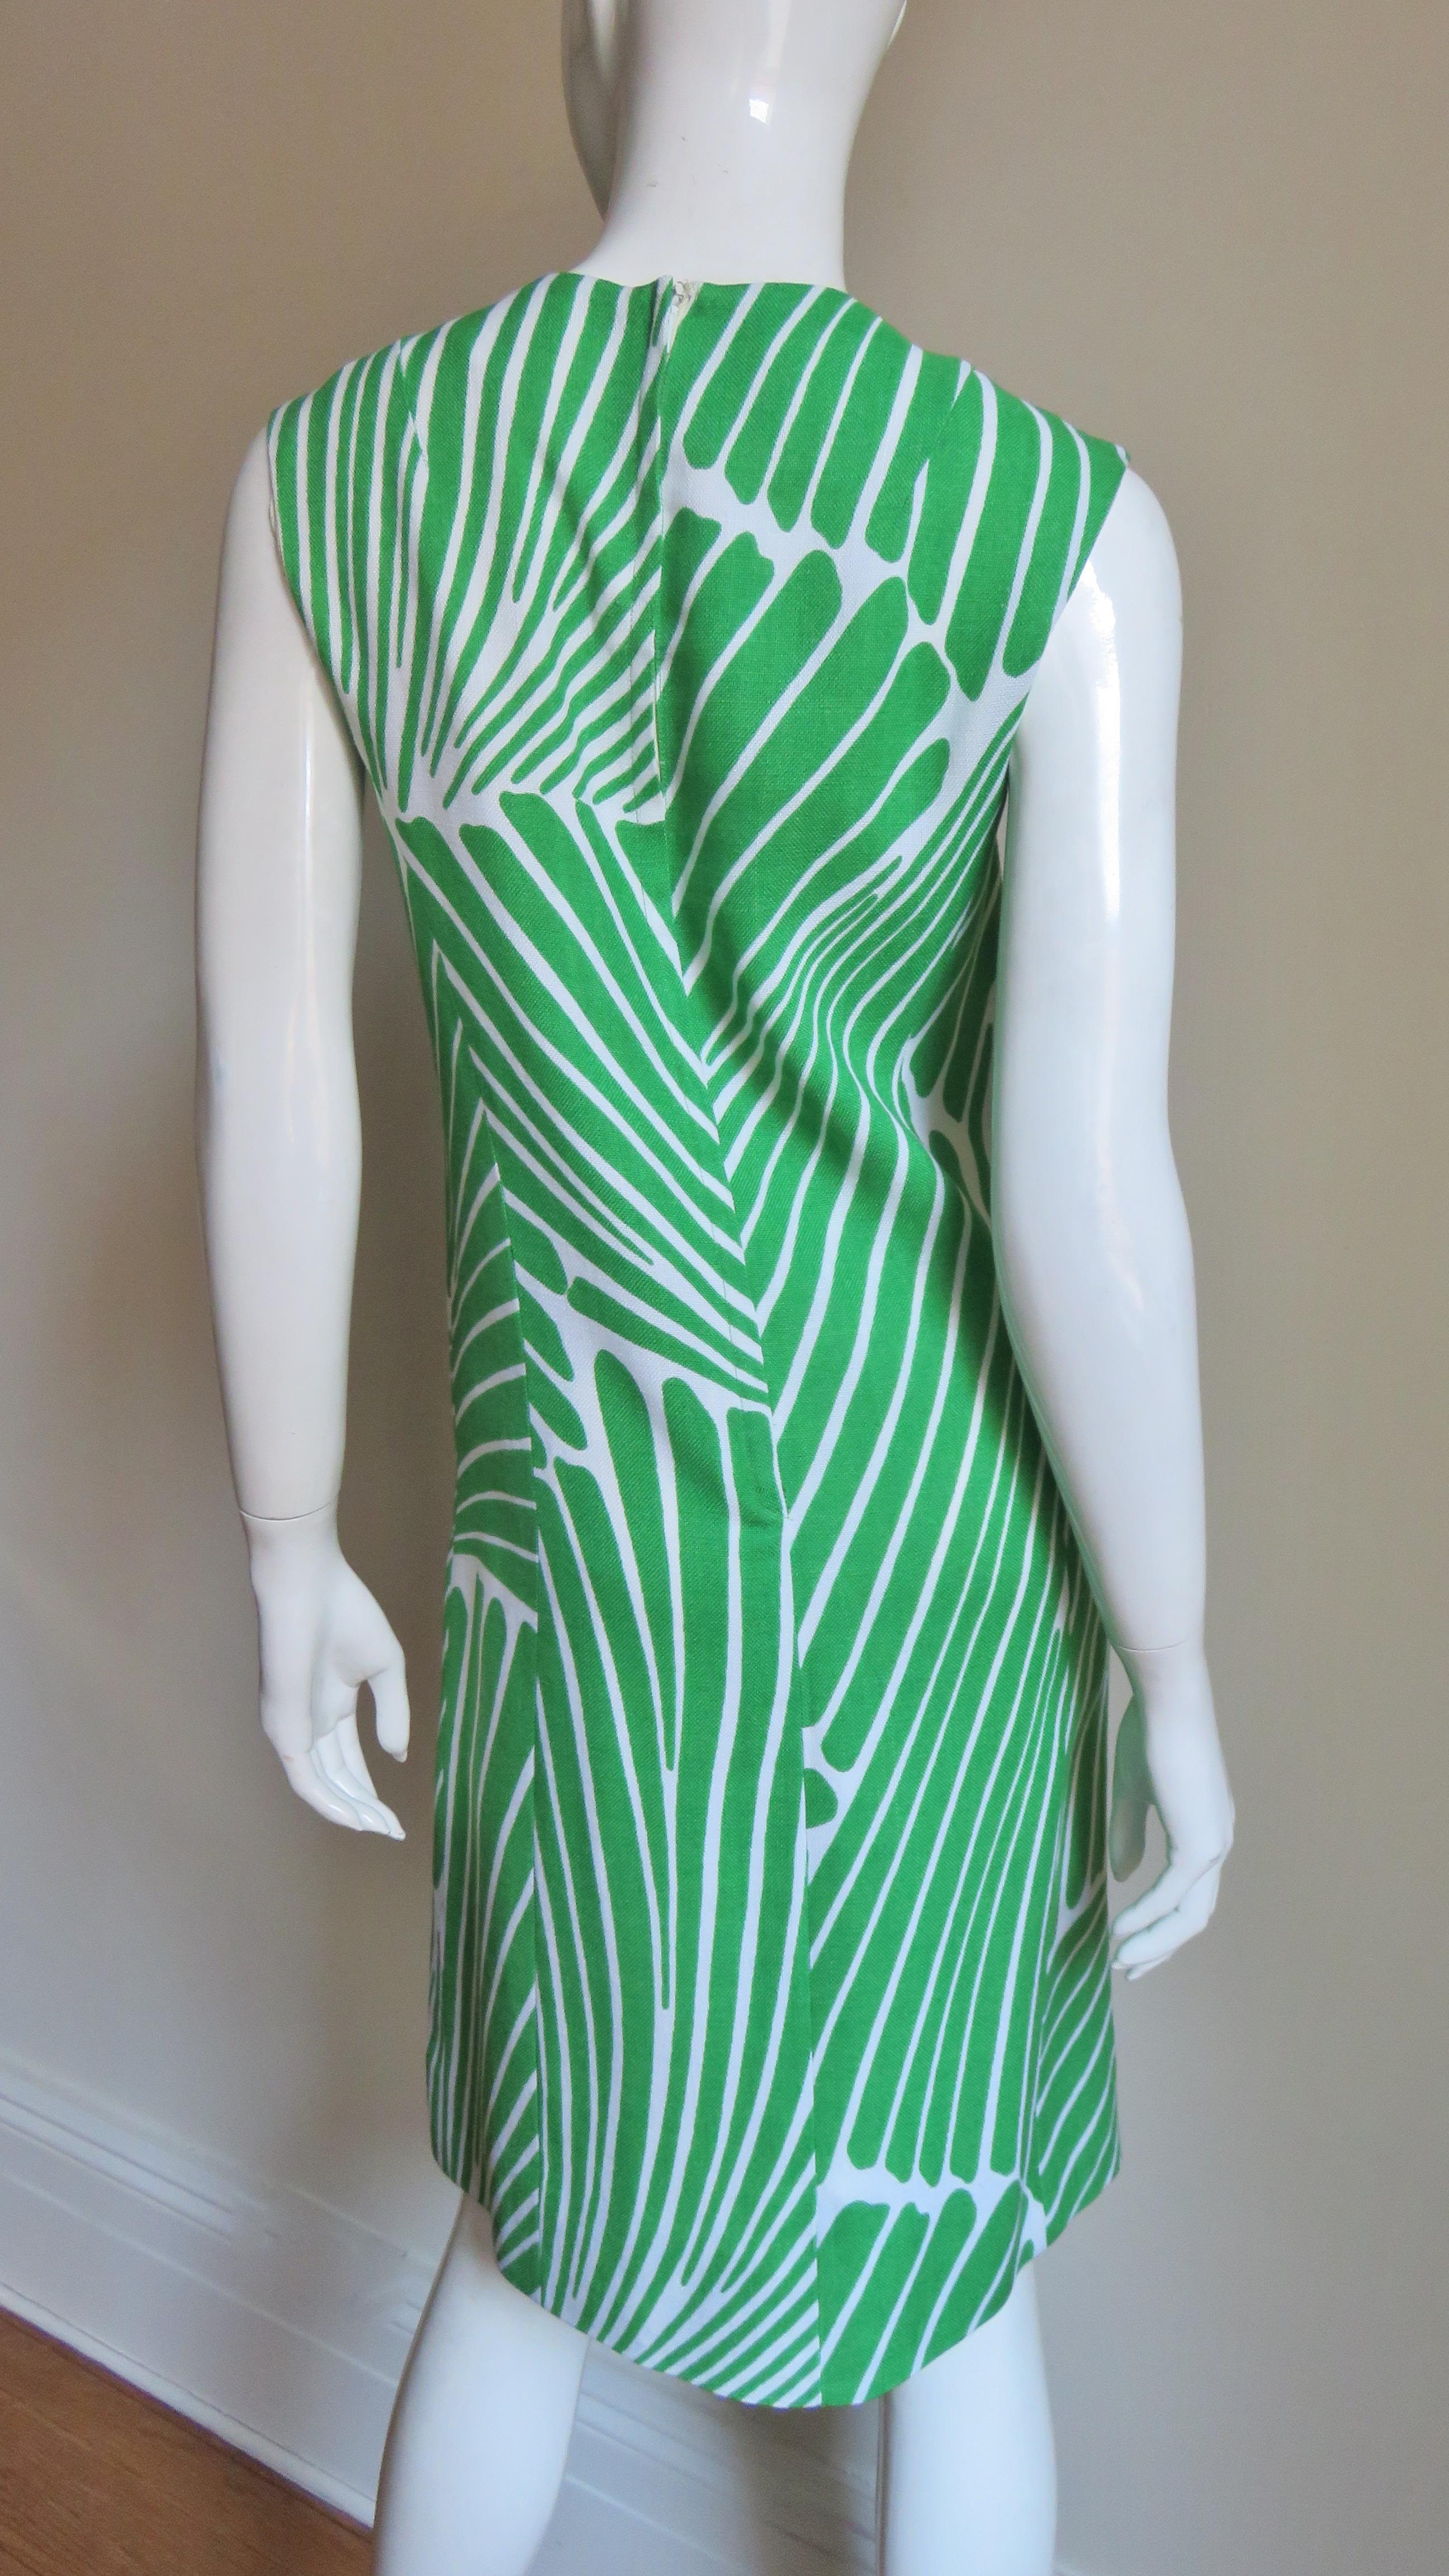  Gilbert Couture 1960s Geometric Dress and Coat 11